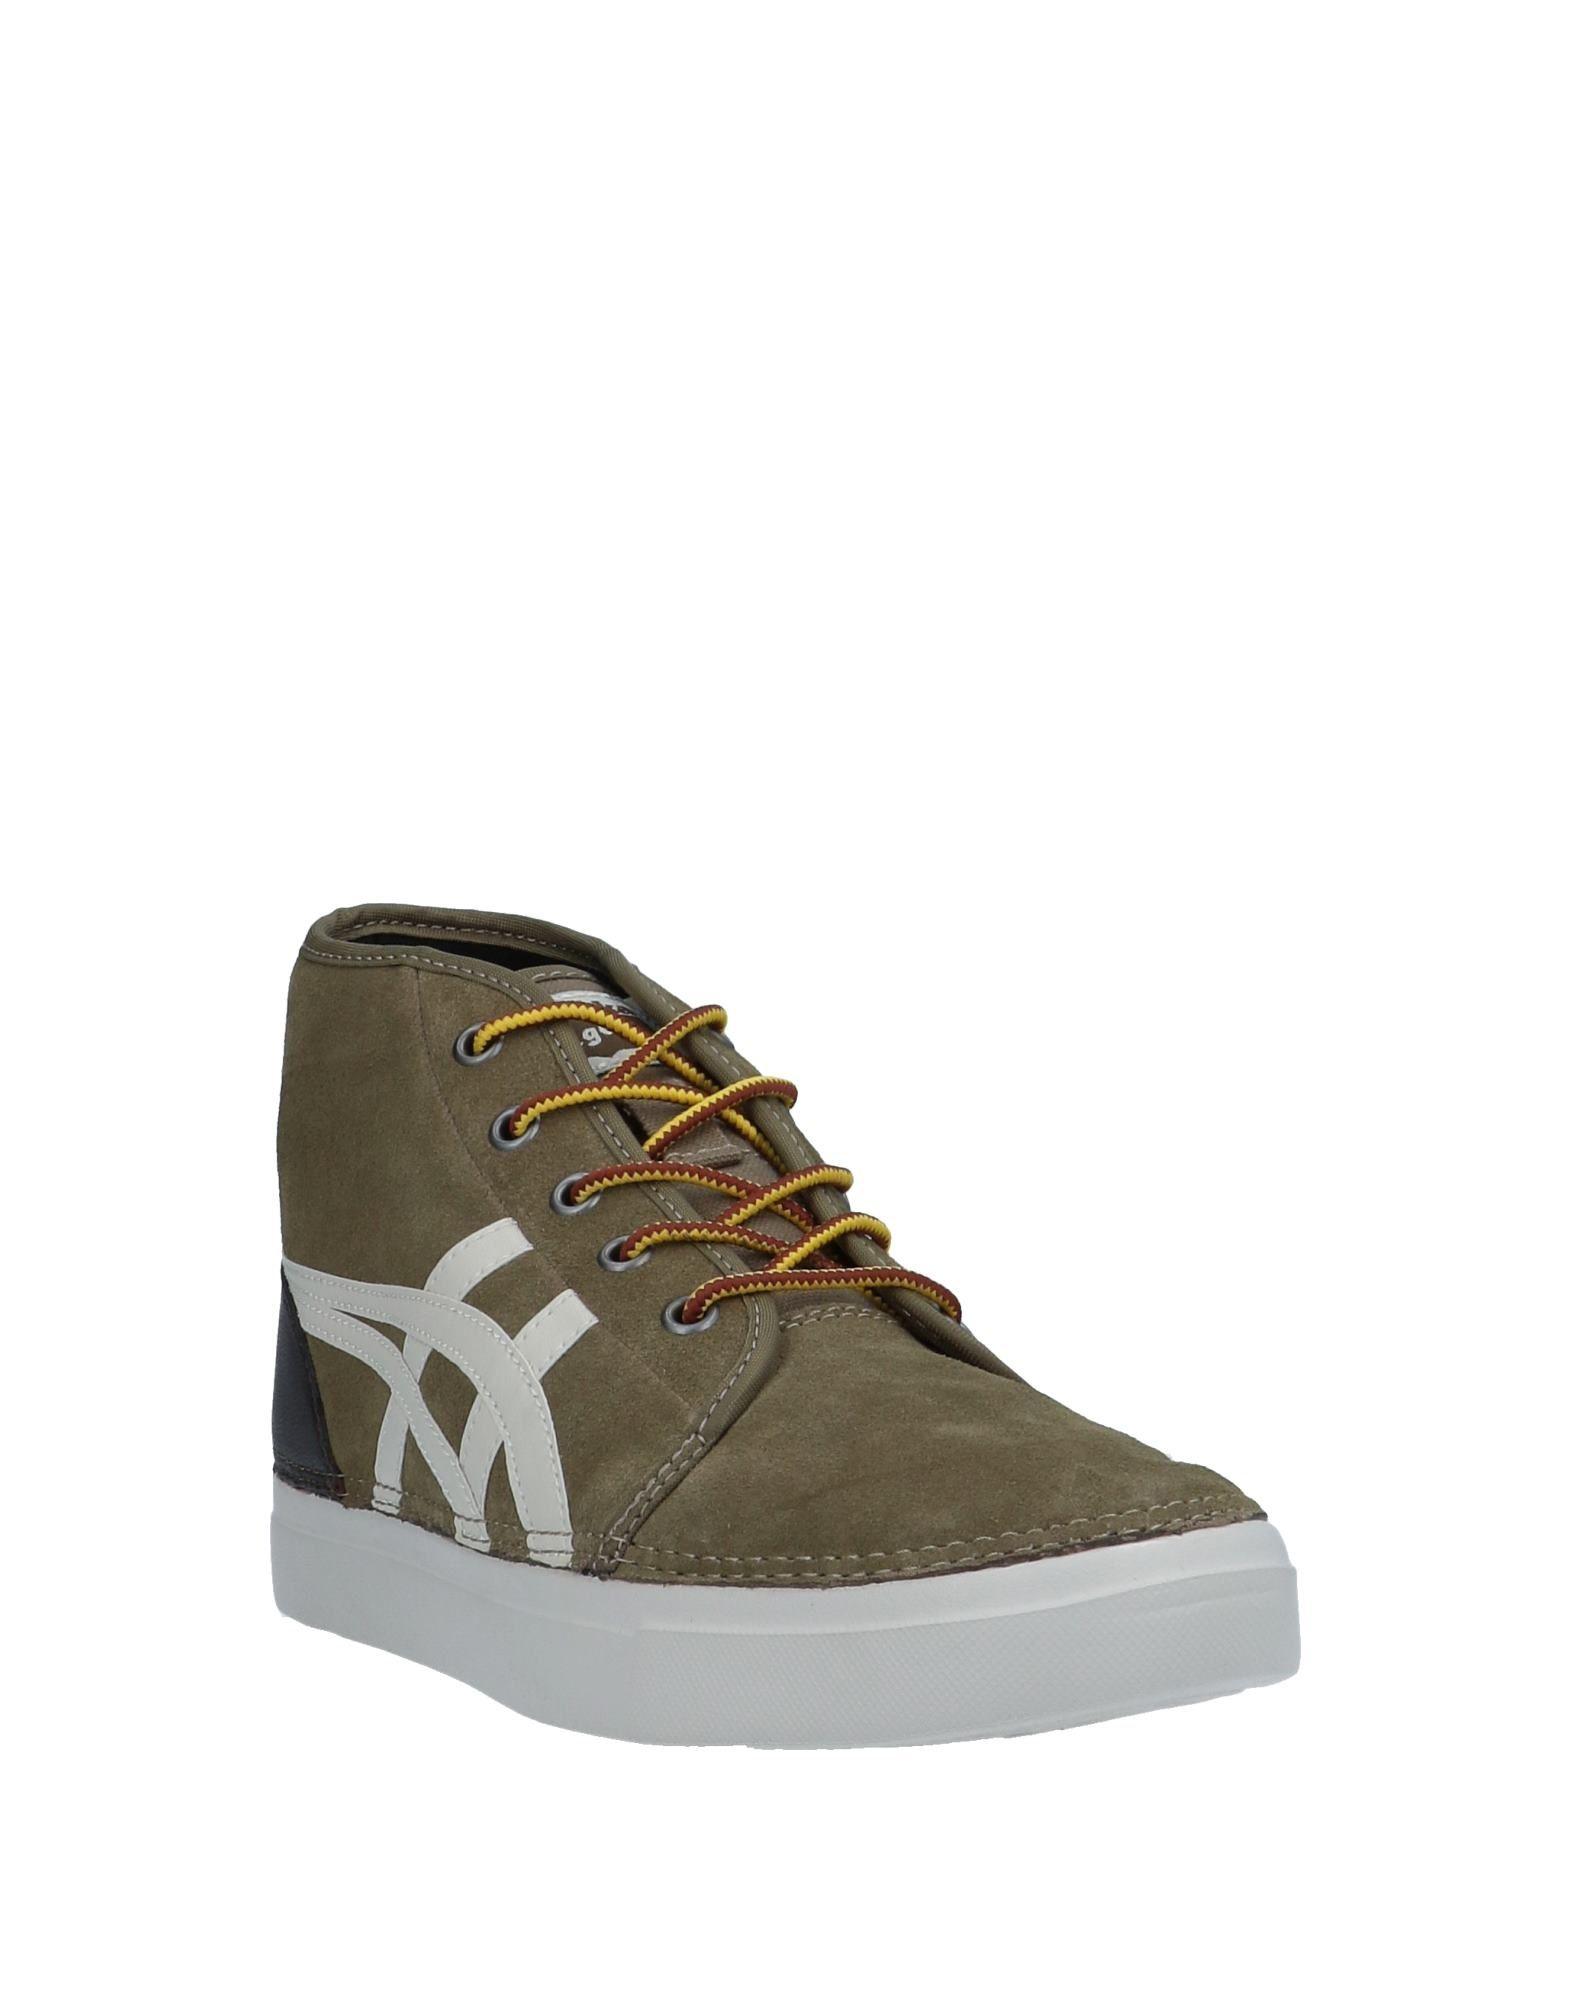 Onitsuka Tiger High-tops & Sneakers in Green for Men - Lyst